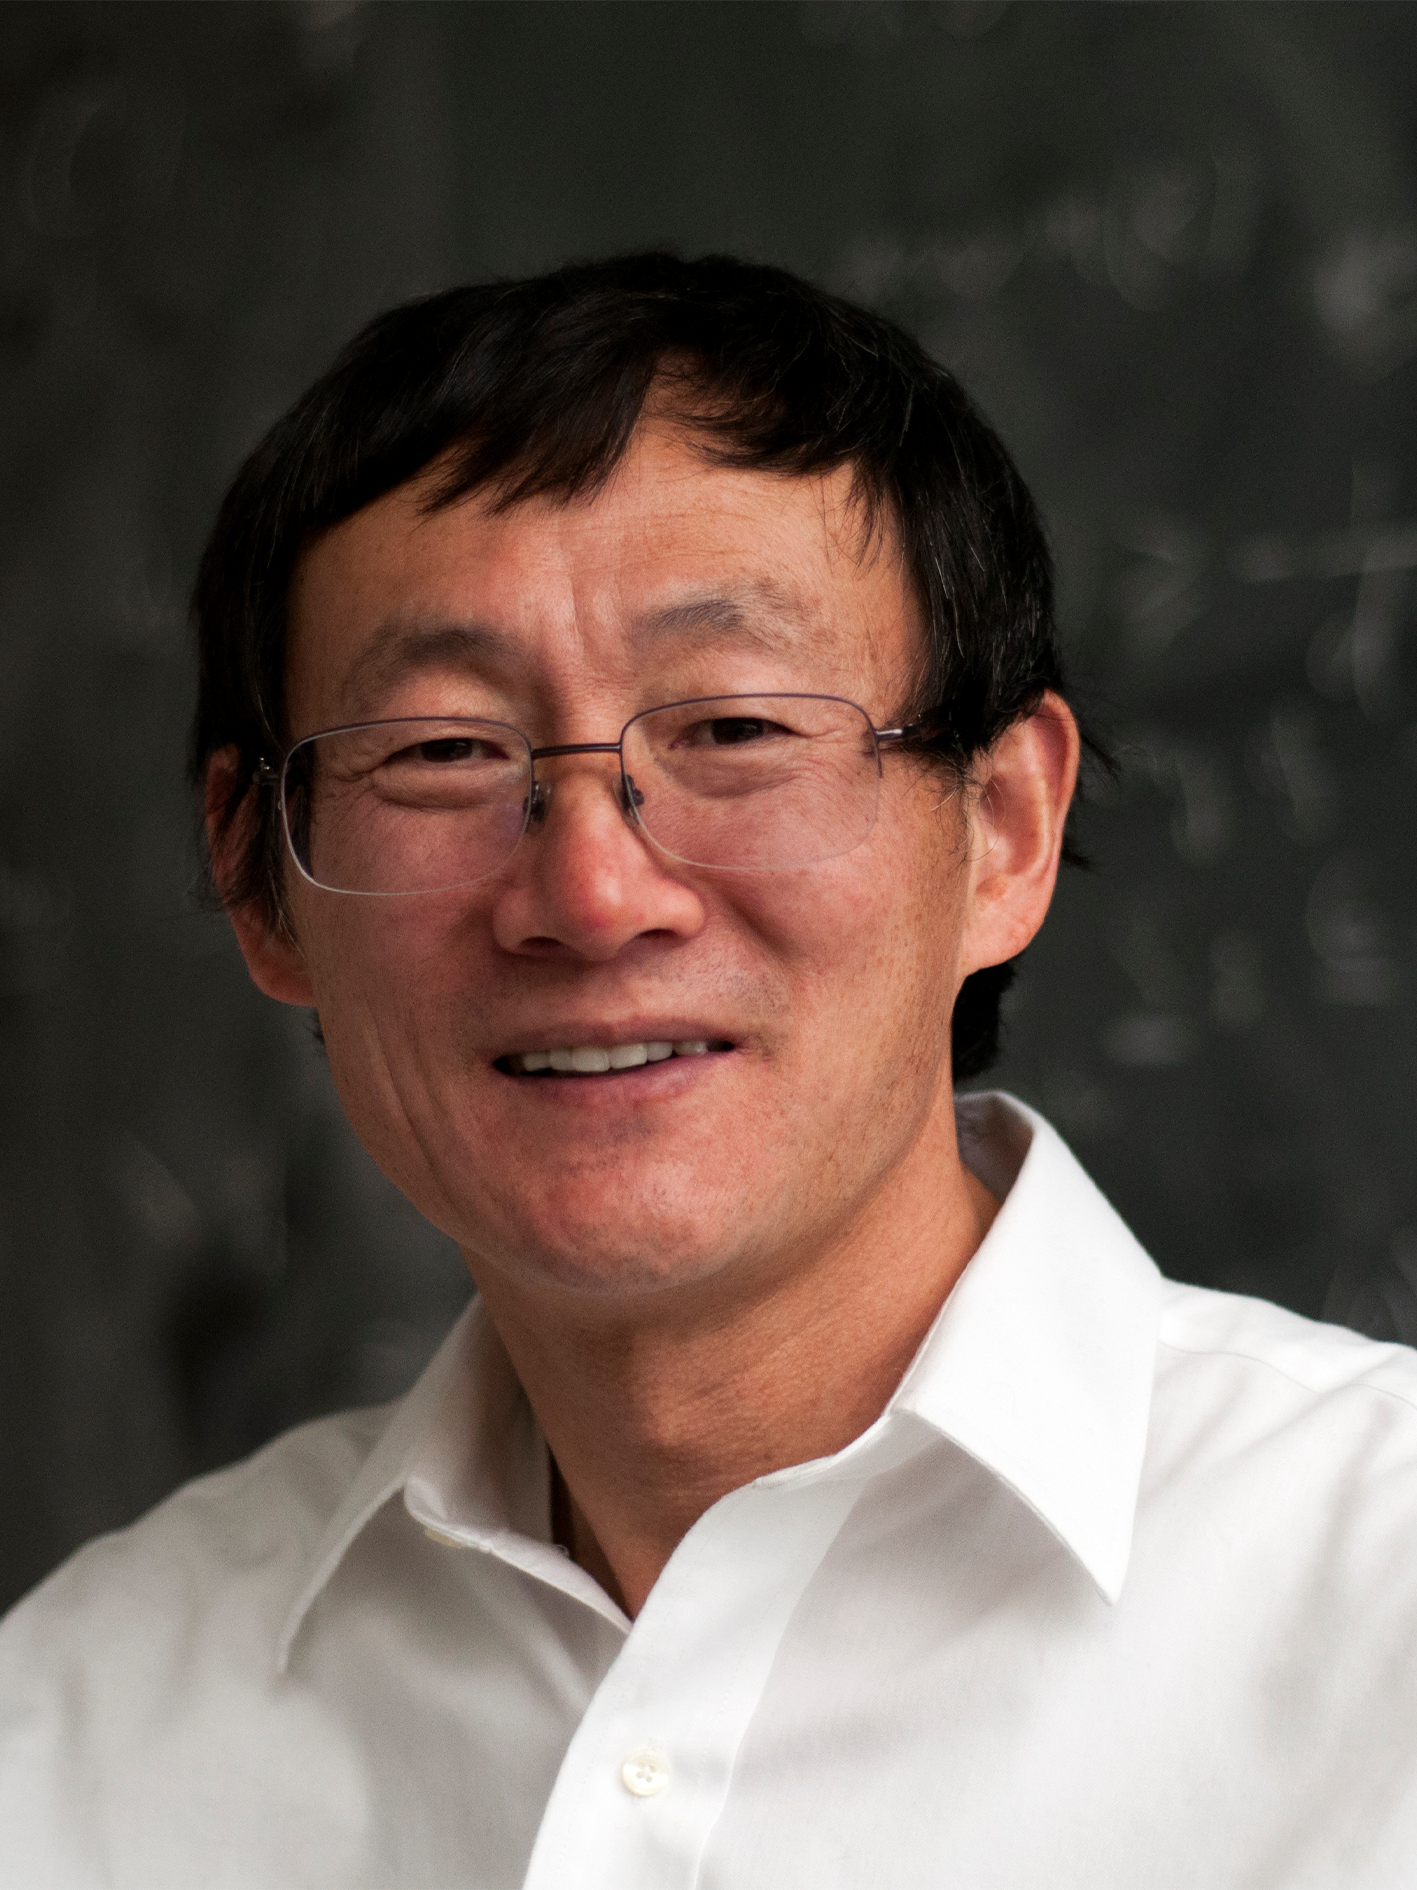 Zhenghan Wang, Principal Researcher at Microsoft Research Station Q at UCSB, a Professor of Mathematics at UCSB, and Distinguished Visiting Research Chair et Perimeter